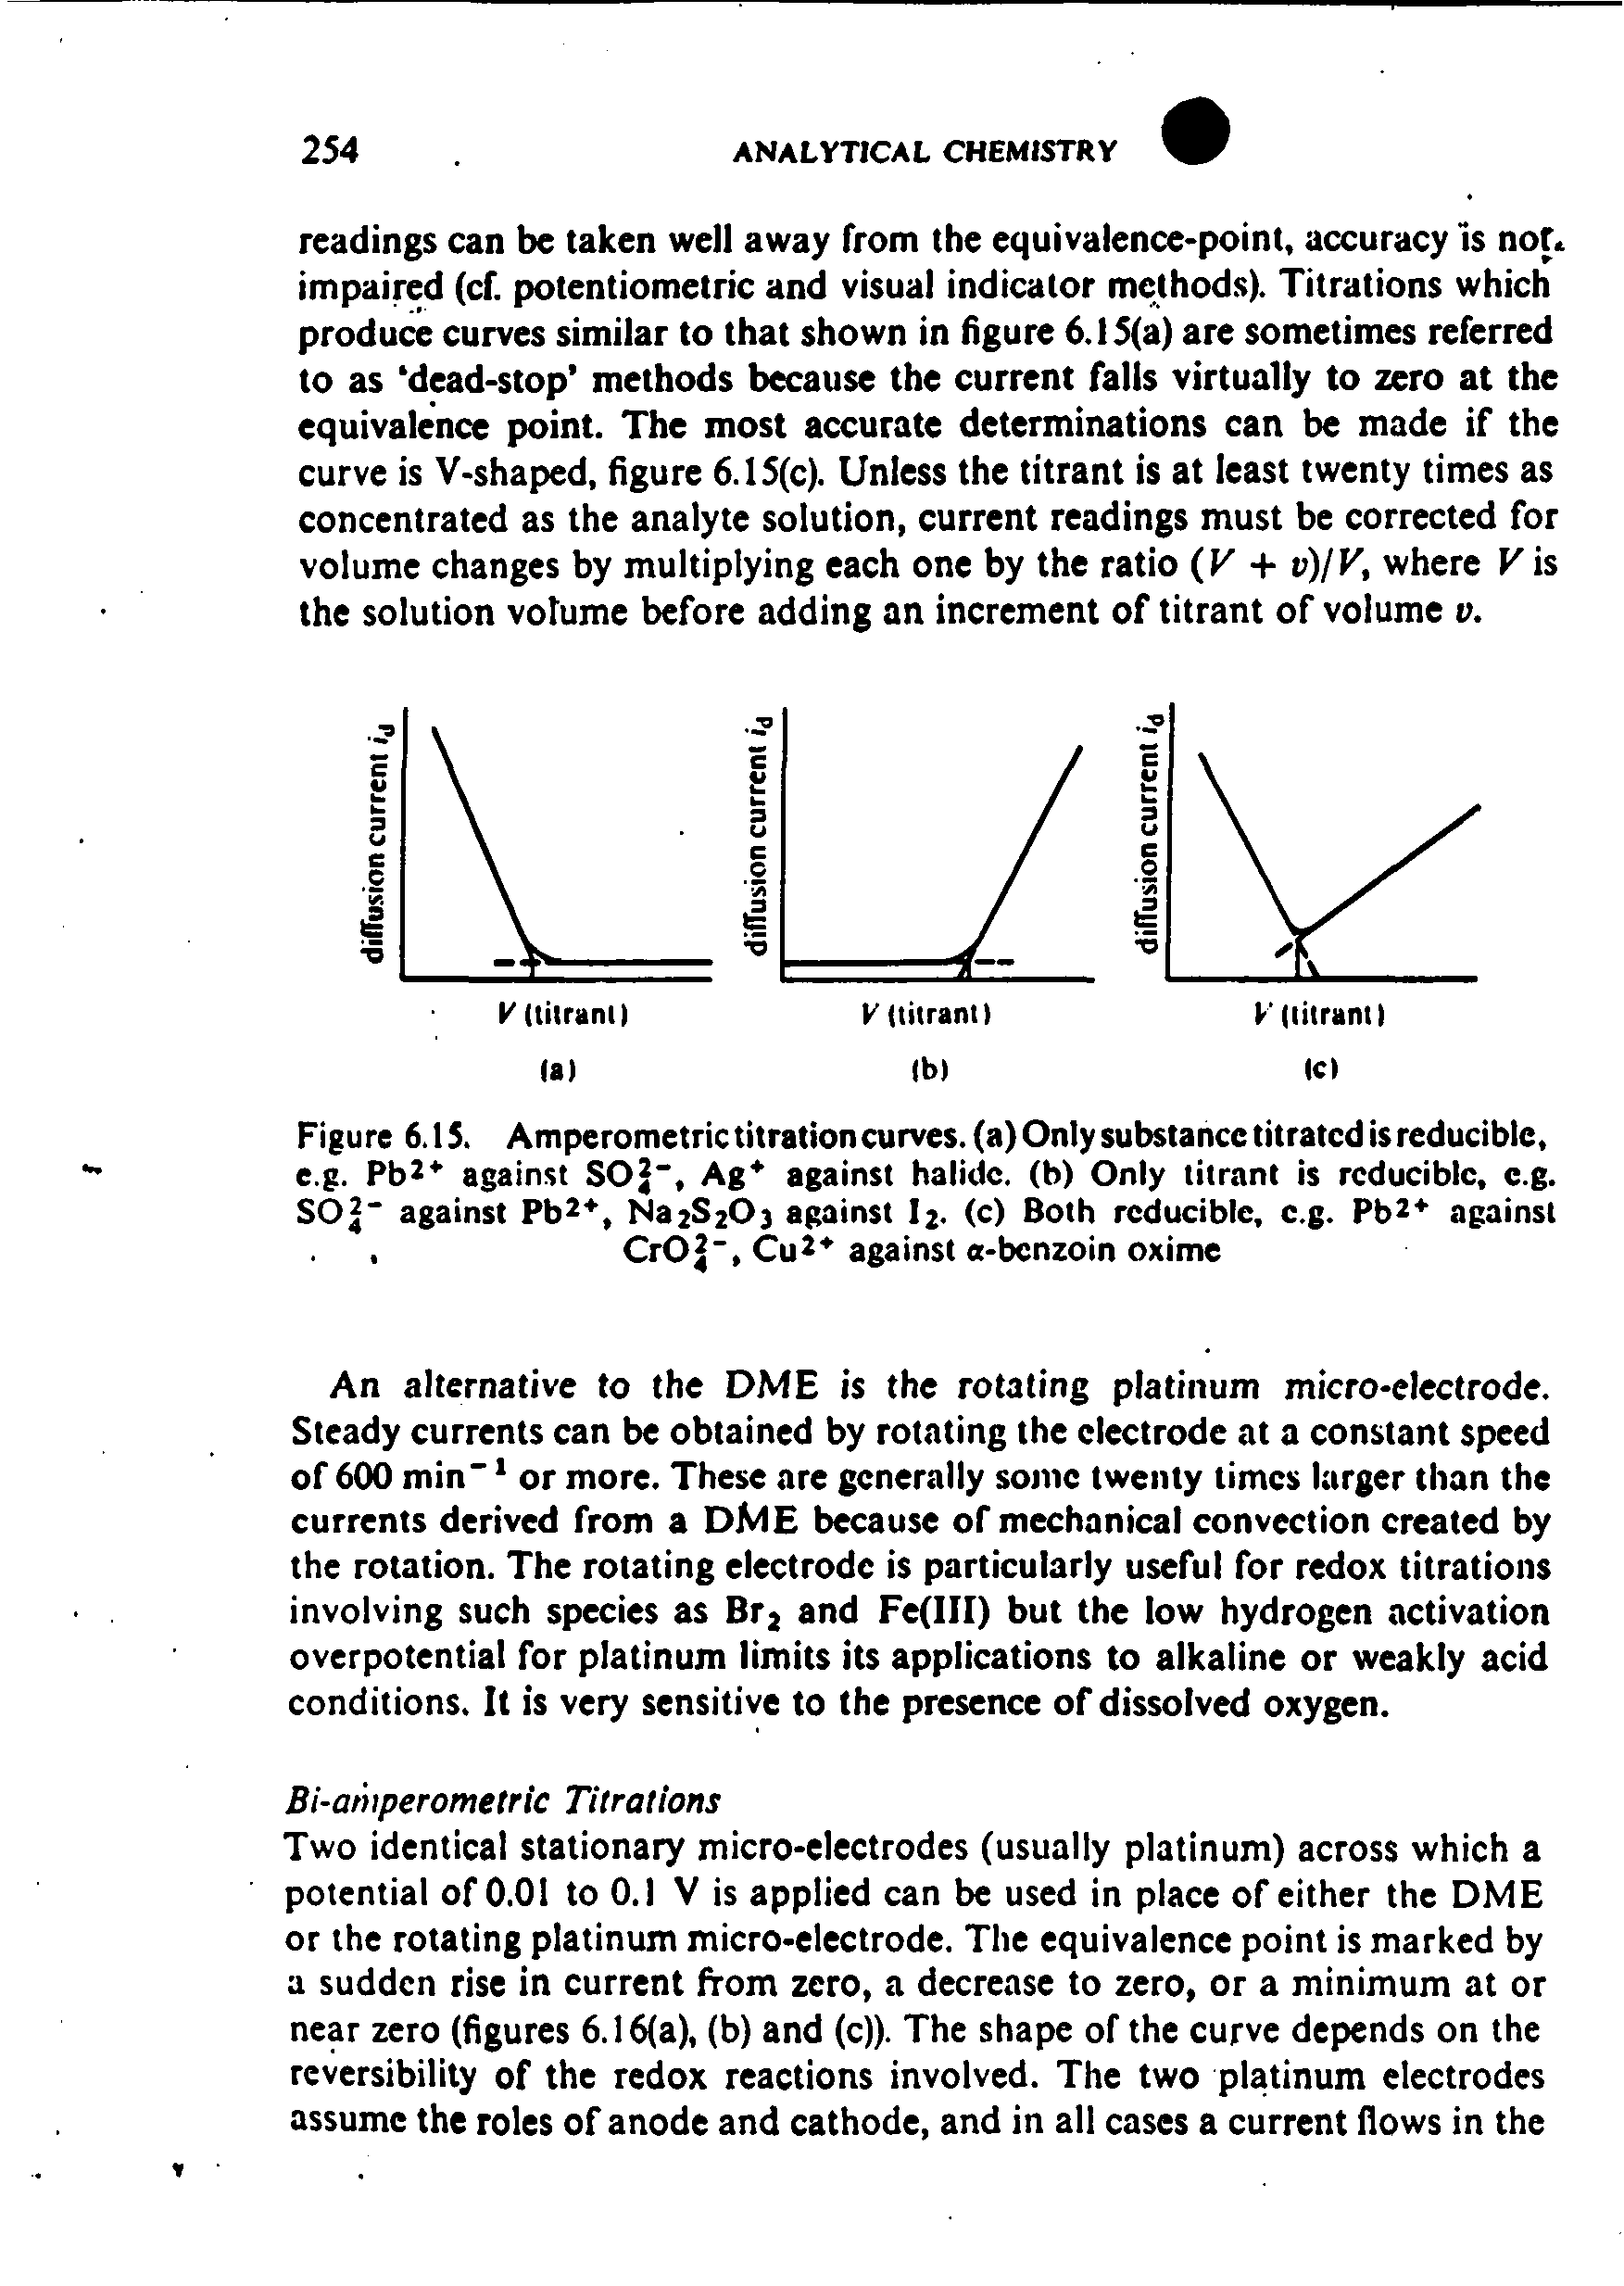 Figure 6.1S. Amperotnetric titration curves, (a) Only substance titrated is reducible, c.g. Pb2 against SOJ", Ag against halide, (b) Only titrant is reducible, c.g. SO " against Pb, Na2S20] against I2. (c) Both reducible, c.g. Pb against CrOJ", Cu against a-benzoin oxime...